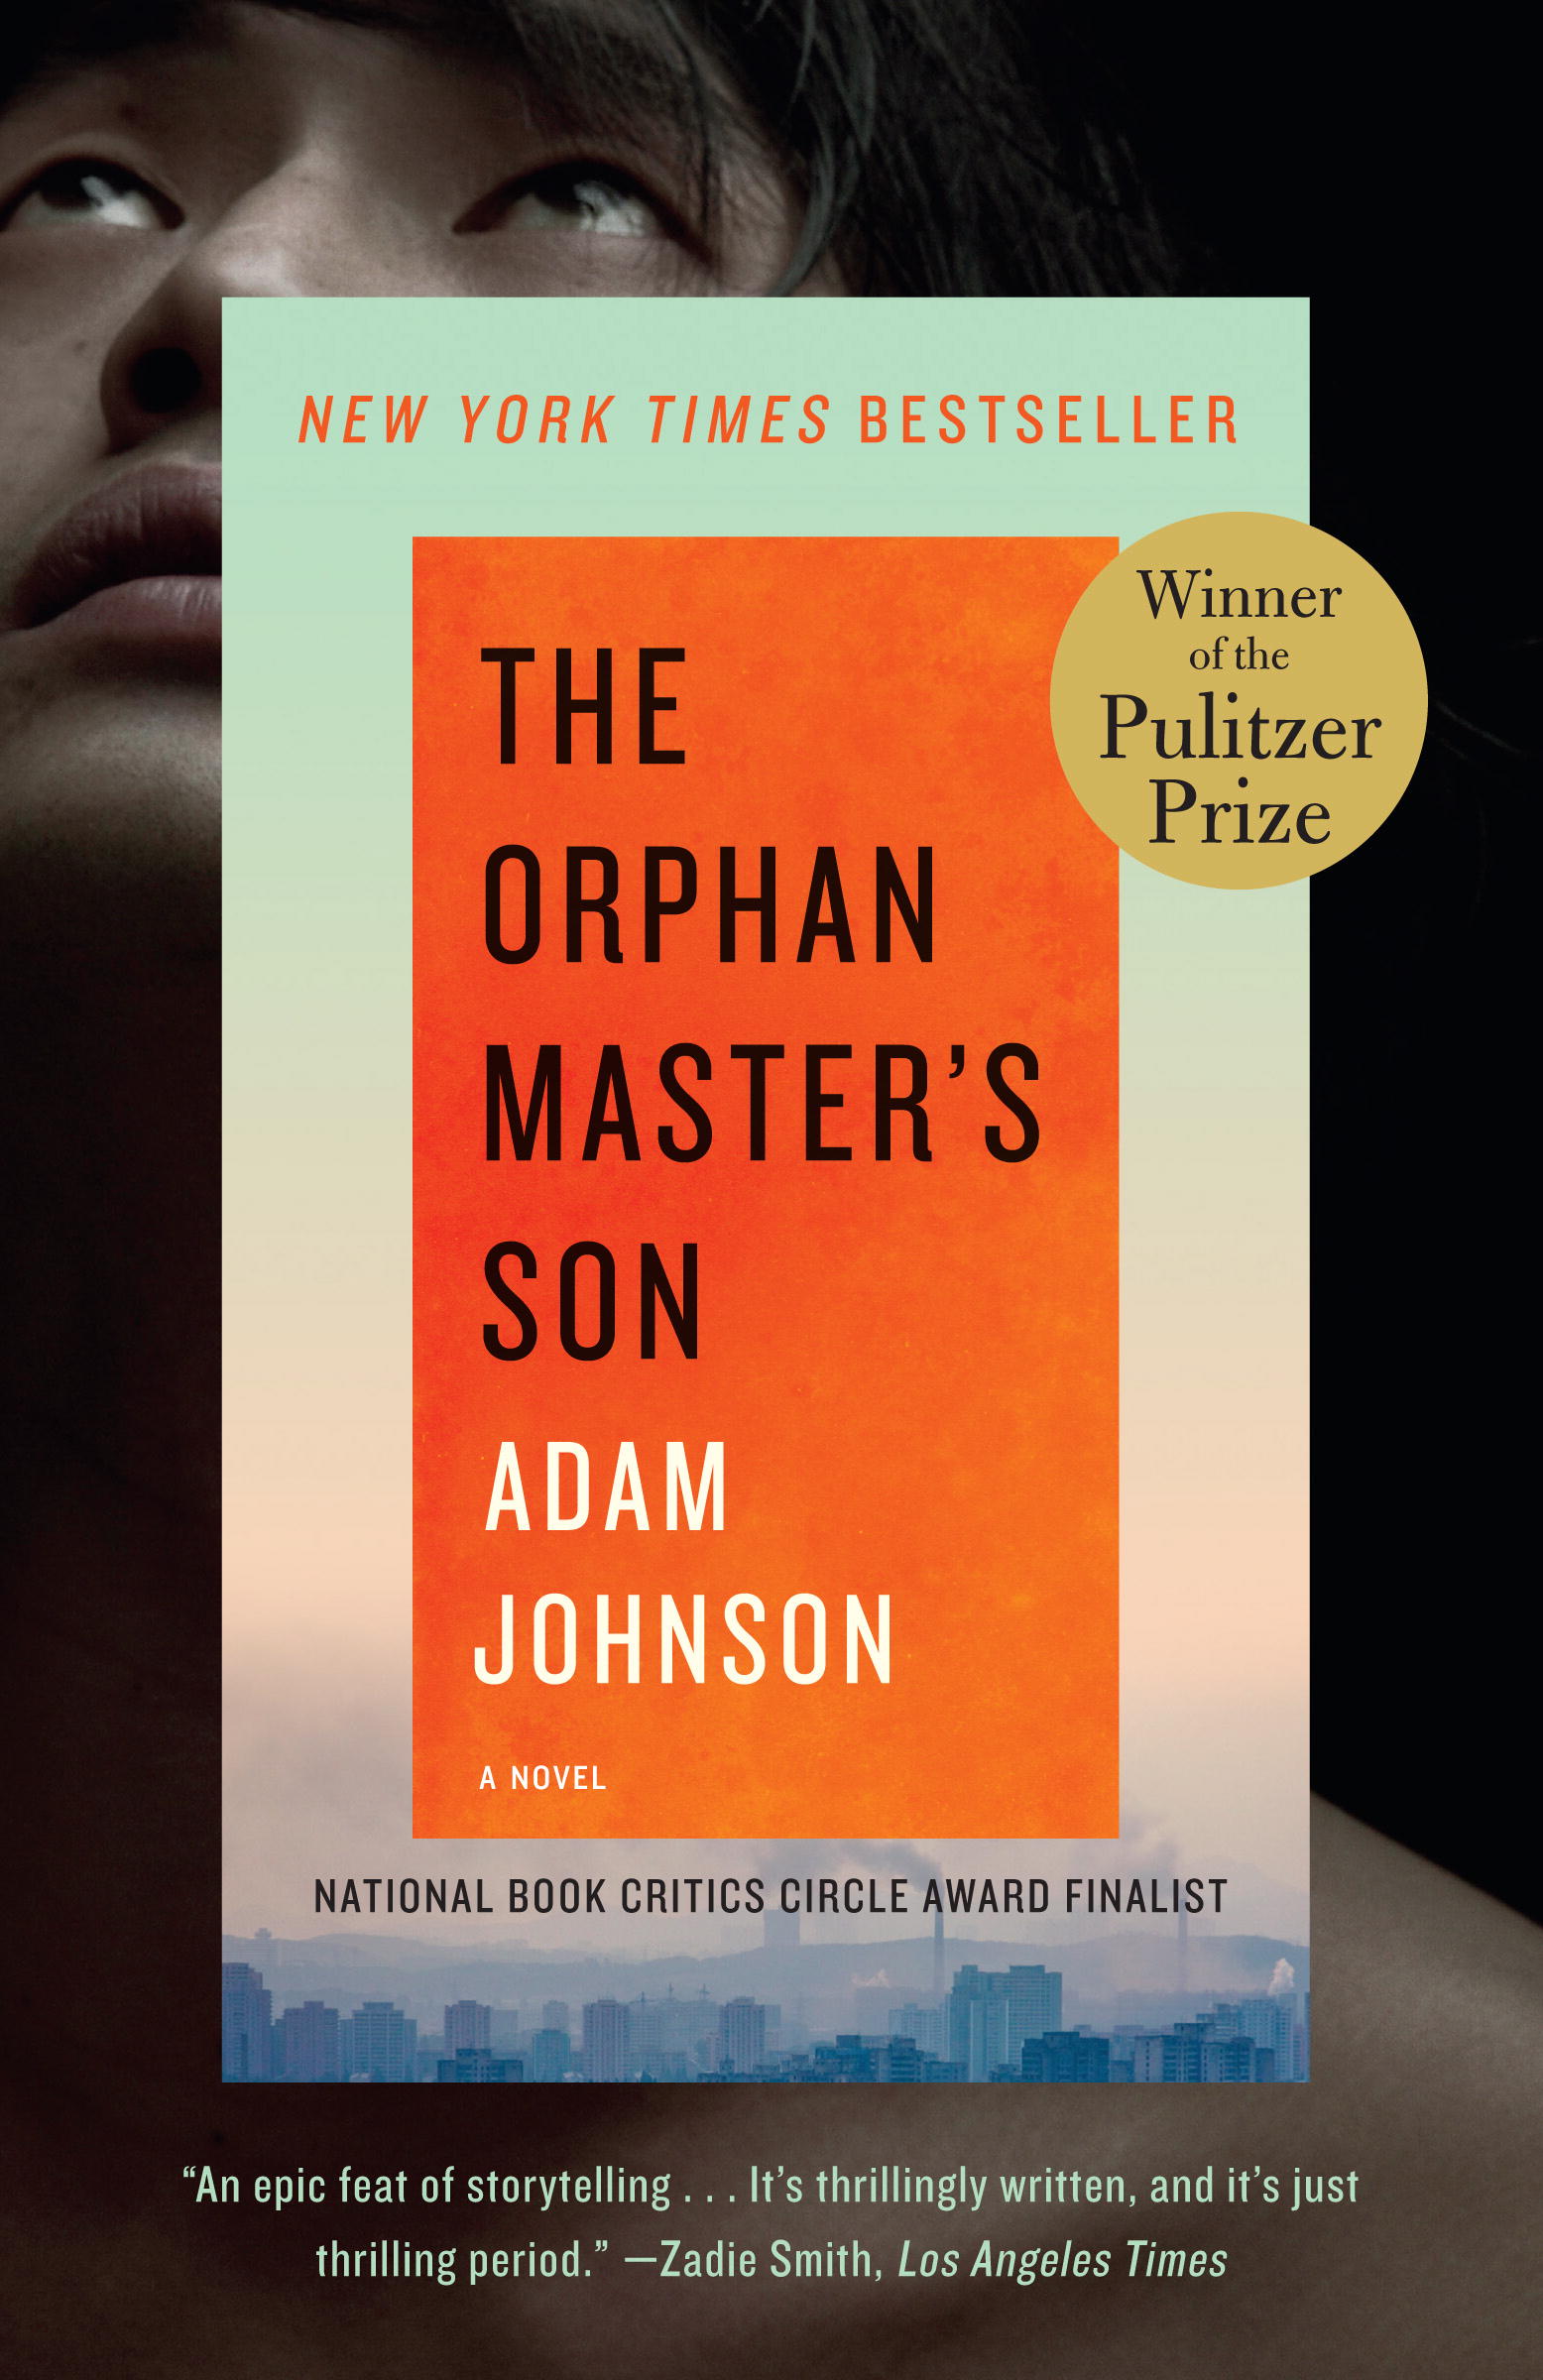 The Orphan Master's Son, winner of the Pulitzer Prize for fiction